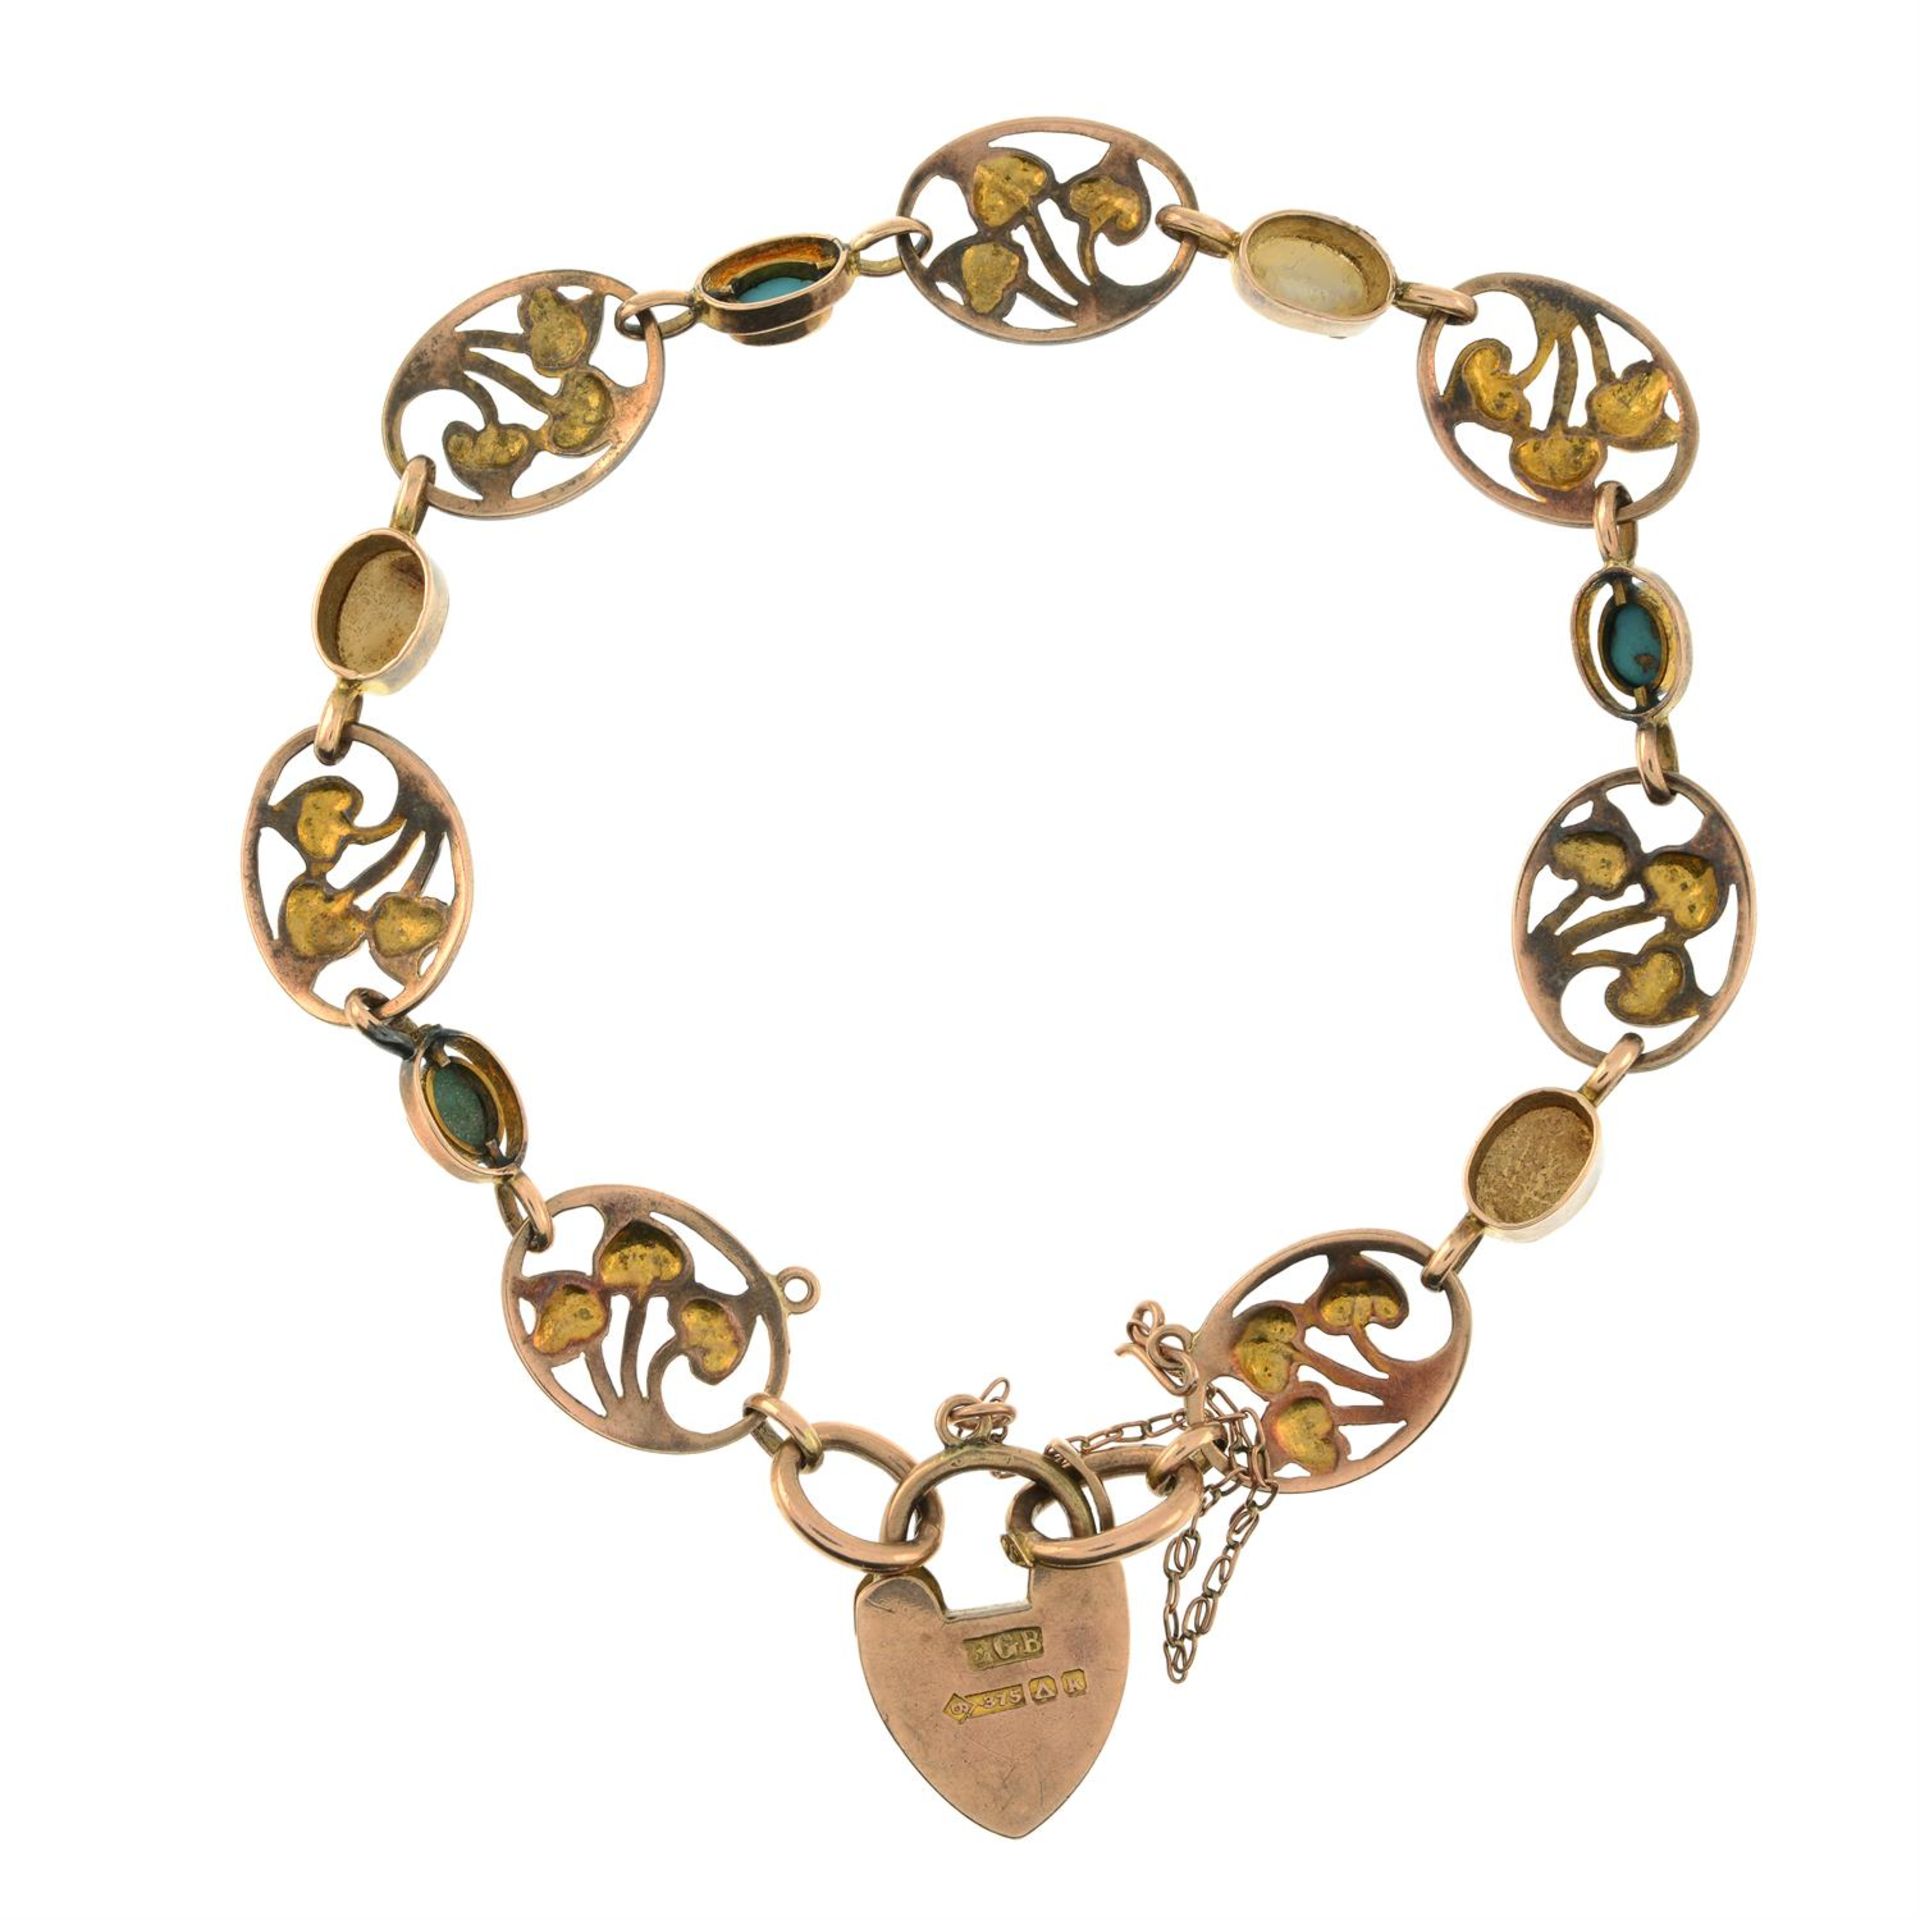 An Edwardian Art Nouveau 9ct gold turquoise and blister pearl foliate bracelet, with padlock clasp. - Image 3 of 3